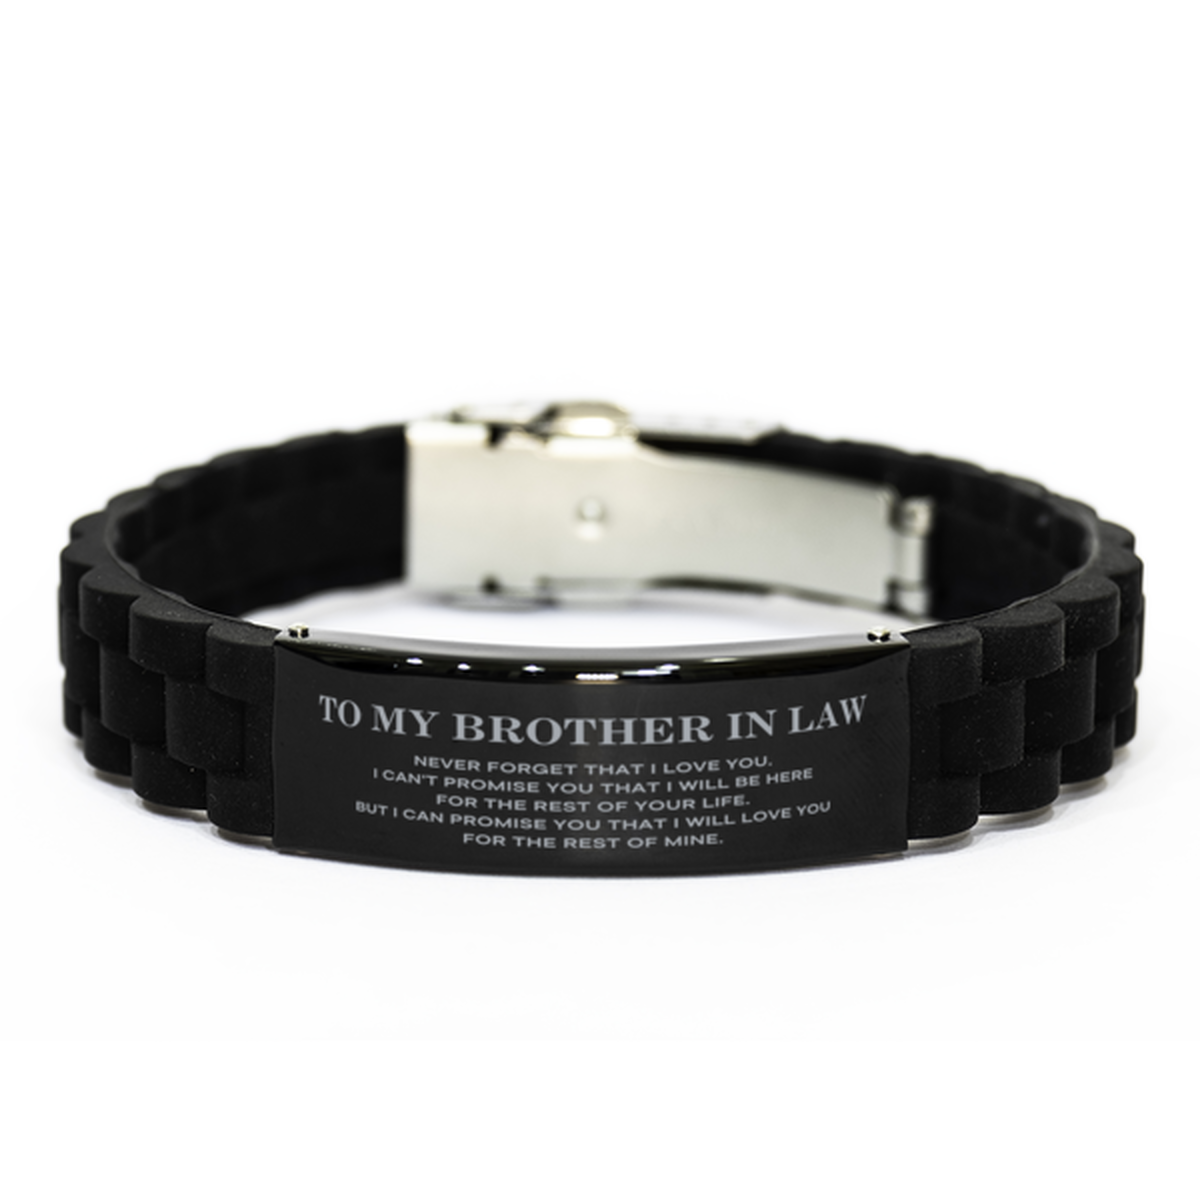 To My Brother In Law Gifts, I will love you for the rest of mine, Love Brother In Law Bracelet, Birthday Christmas Unique Black Glidelock Clasp Bracelet For Brother In Law